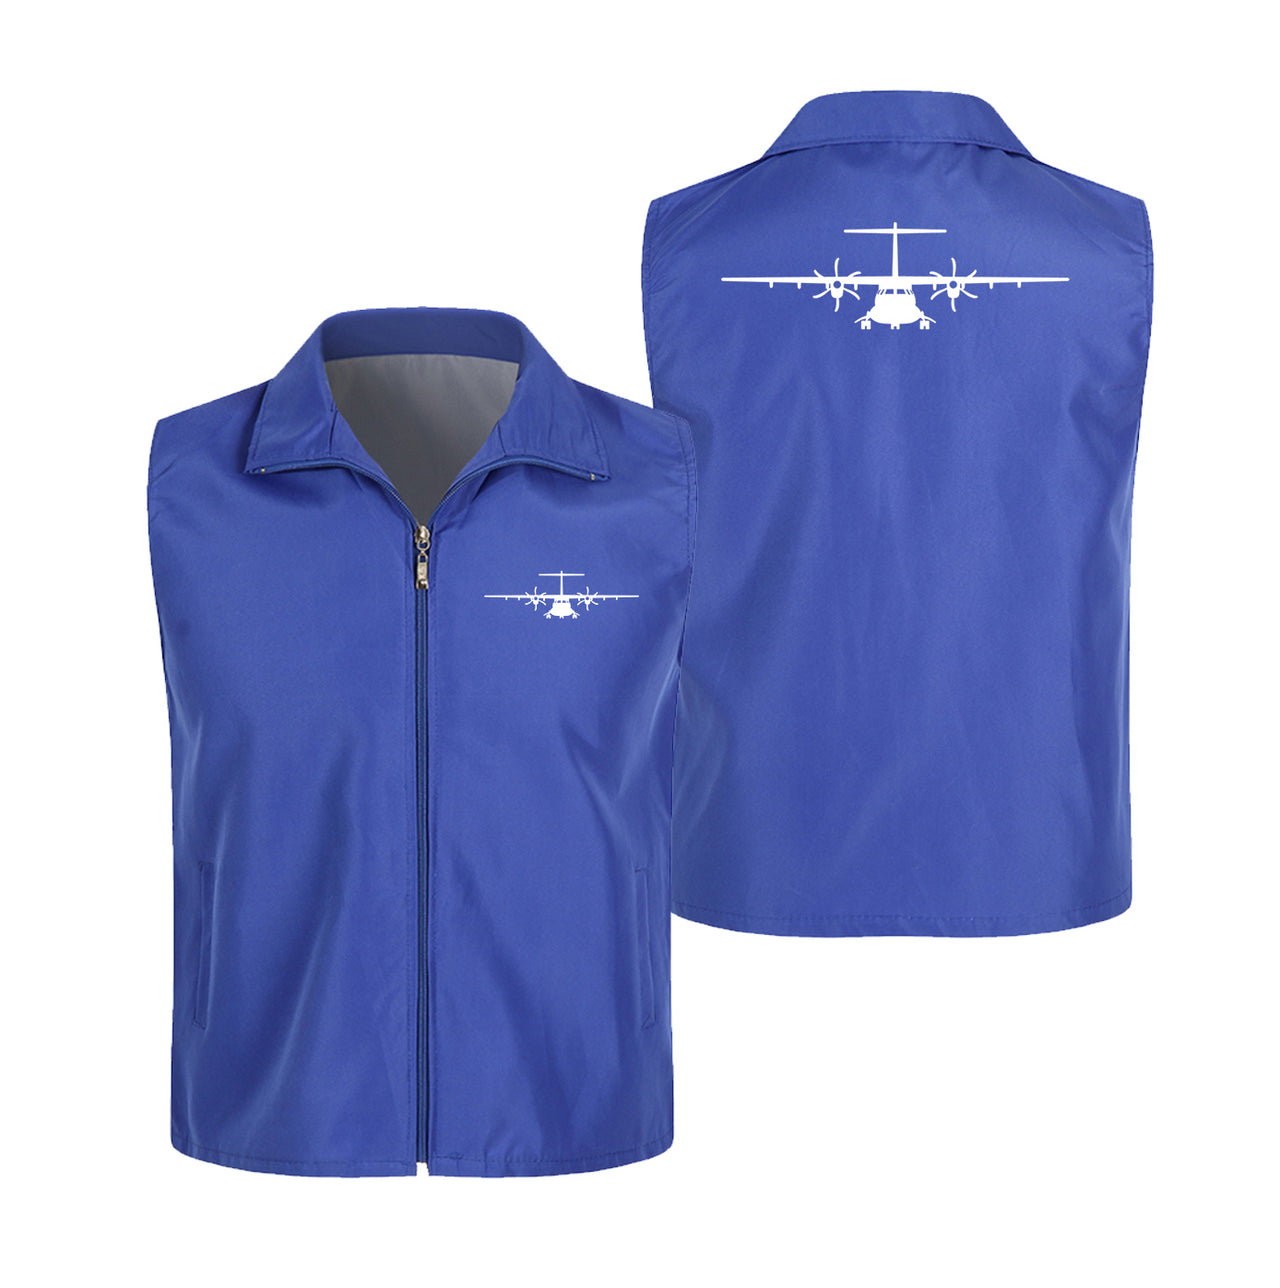 ATR-72 Silhouette Designed Thin Style Vests